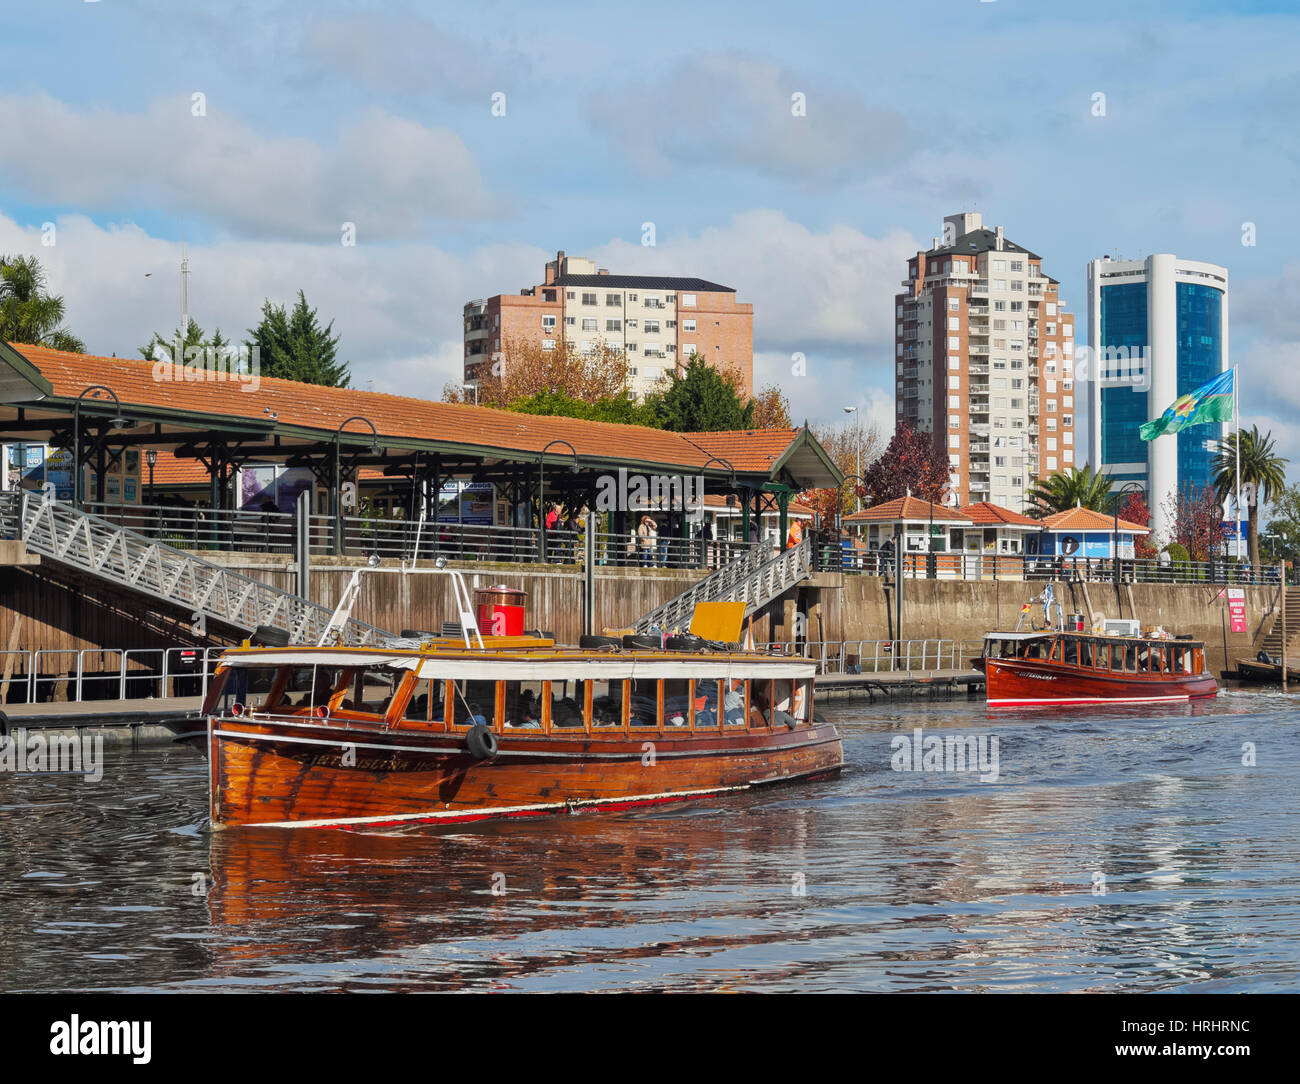 Vintage mahogany motorboats by the Fluvial Station on the Tigre River Canal, Tigre, Buenos Aires Province, Argentina Stock Photo